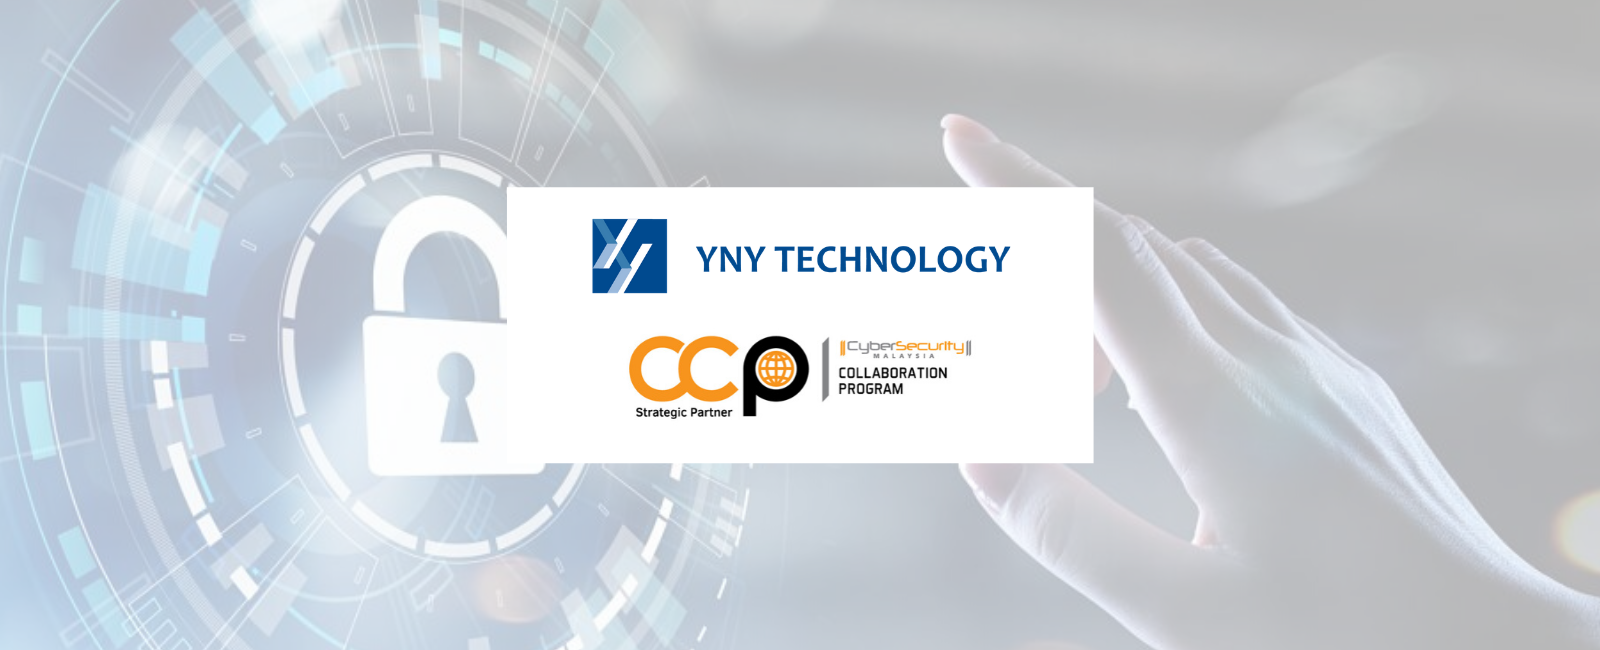 New Partnership Announcement for YNY Technology & CyberSecurity Malaysia